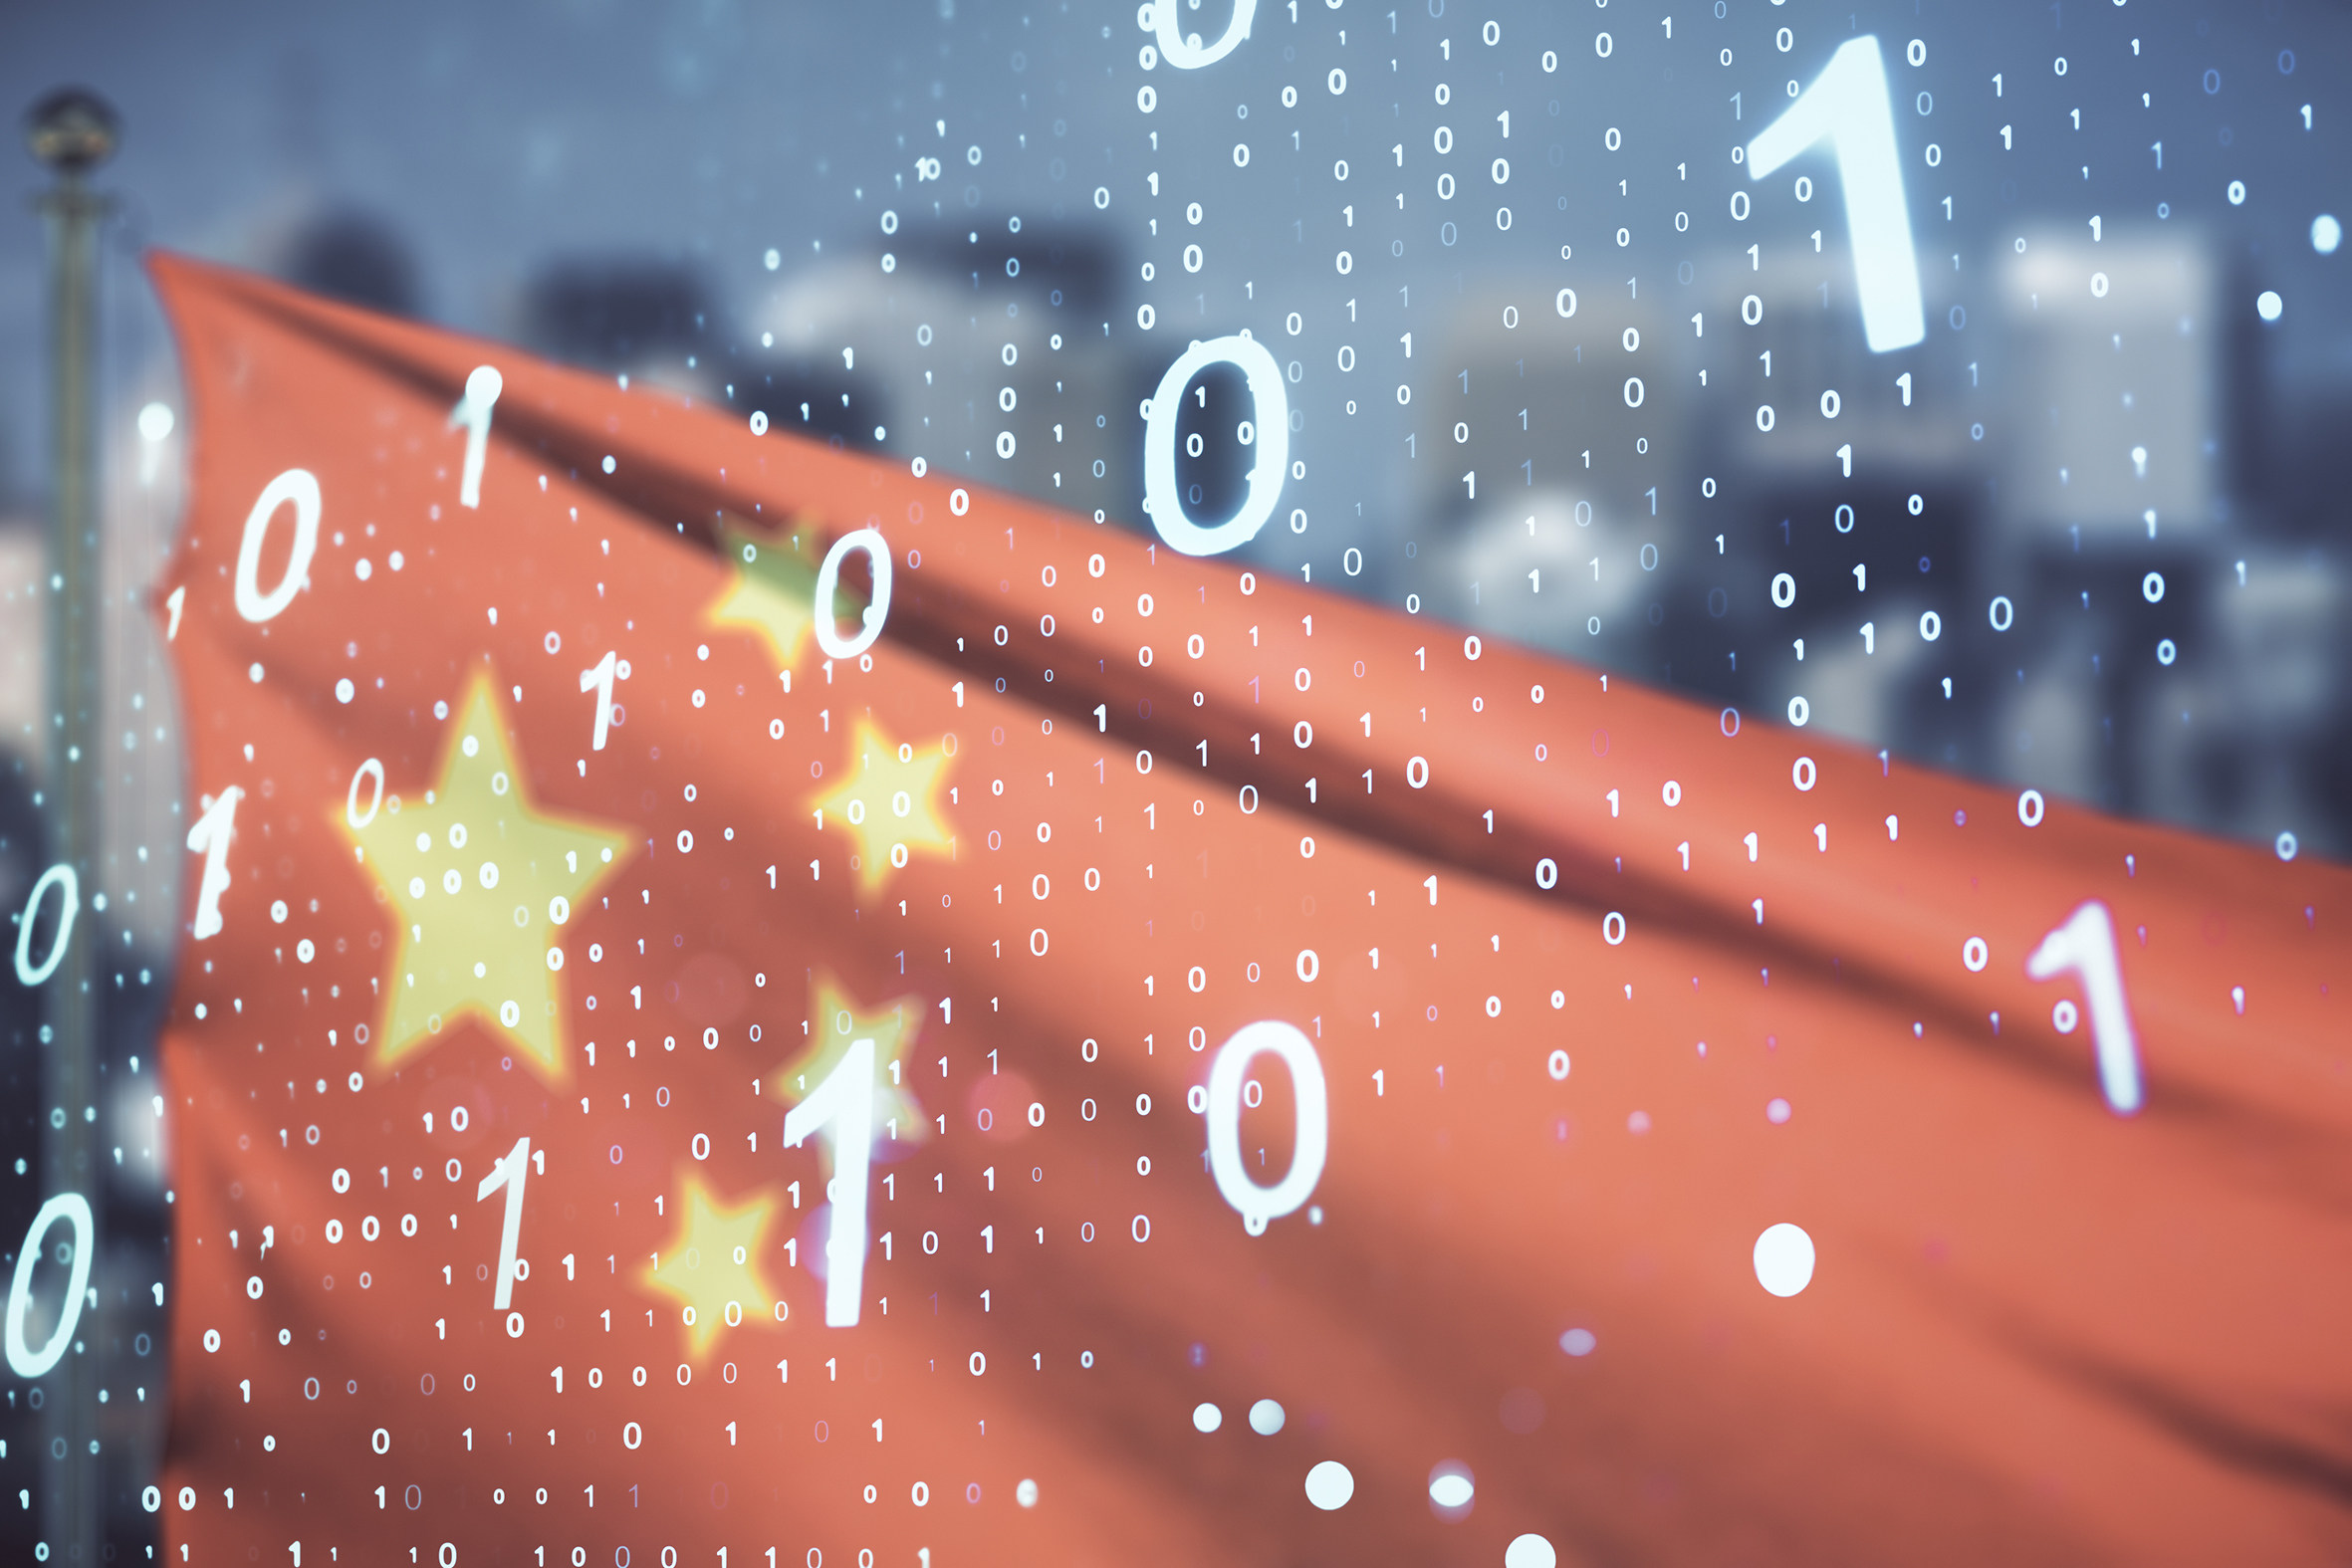 China has tightened rules on data sharing amid rising tensions with the US. Photo: Shutterstock